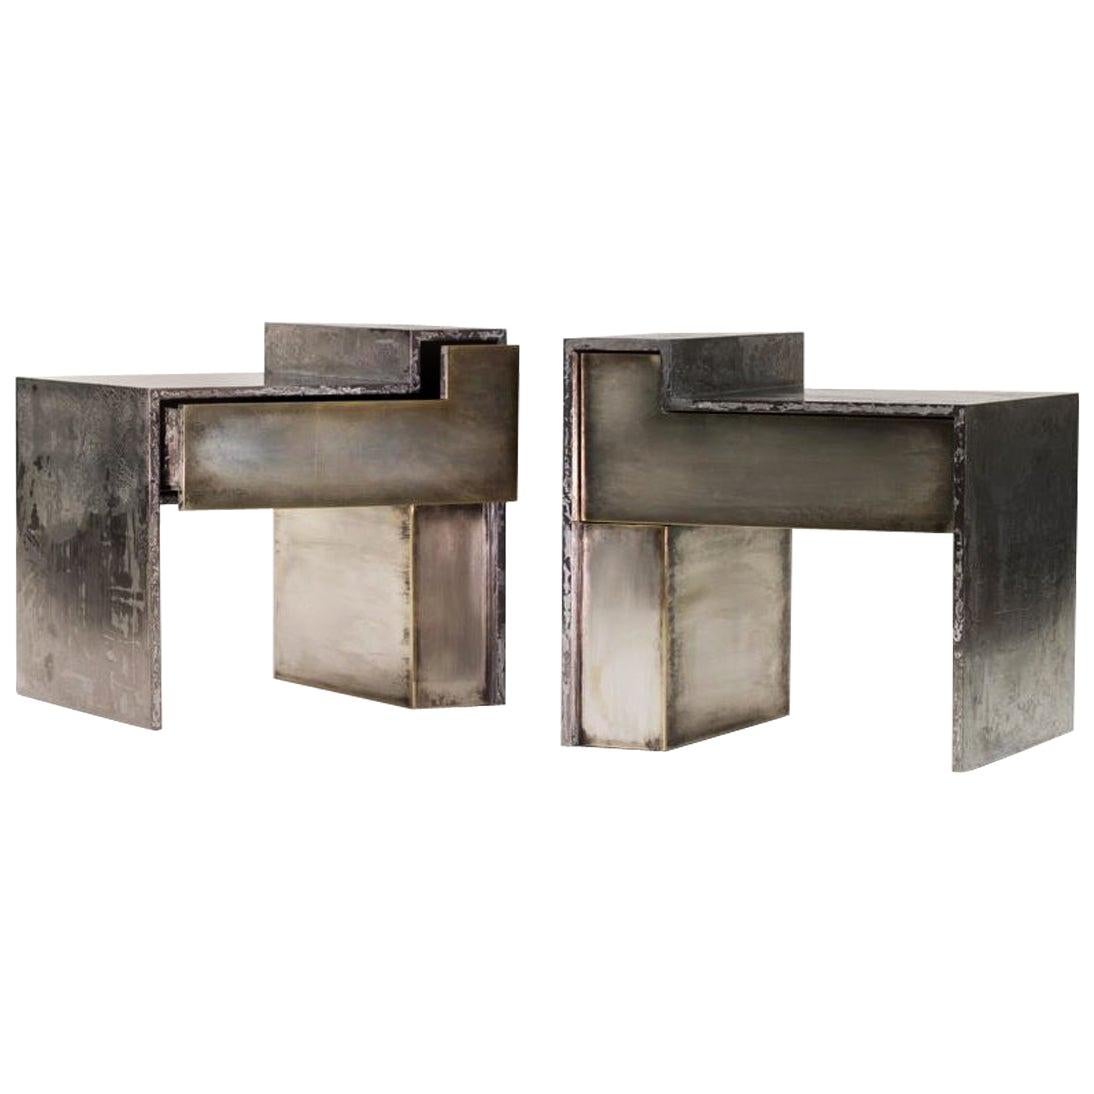 RLB BST Silvered Brass and Gunmetal Bedside Table Set of Two